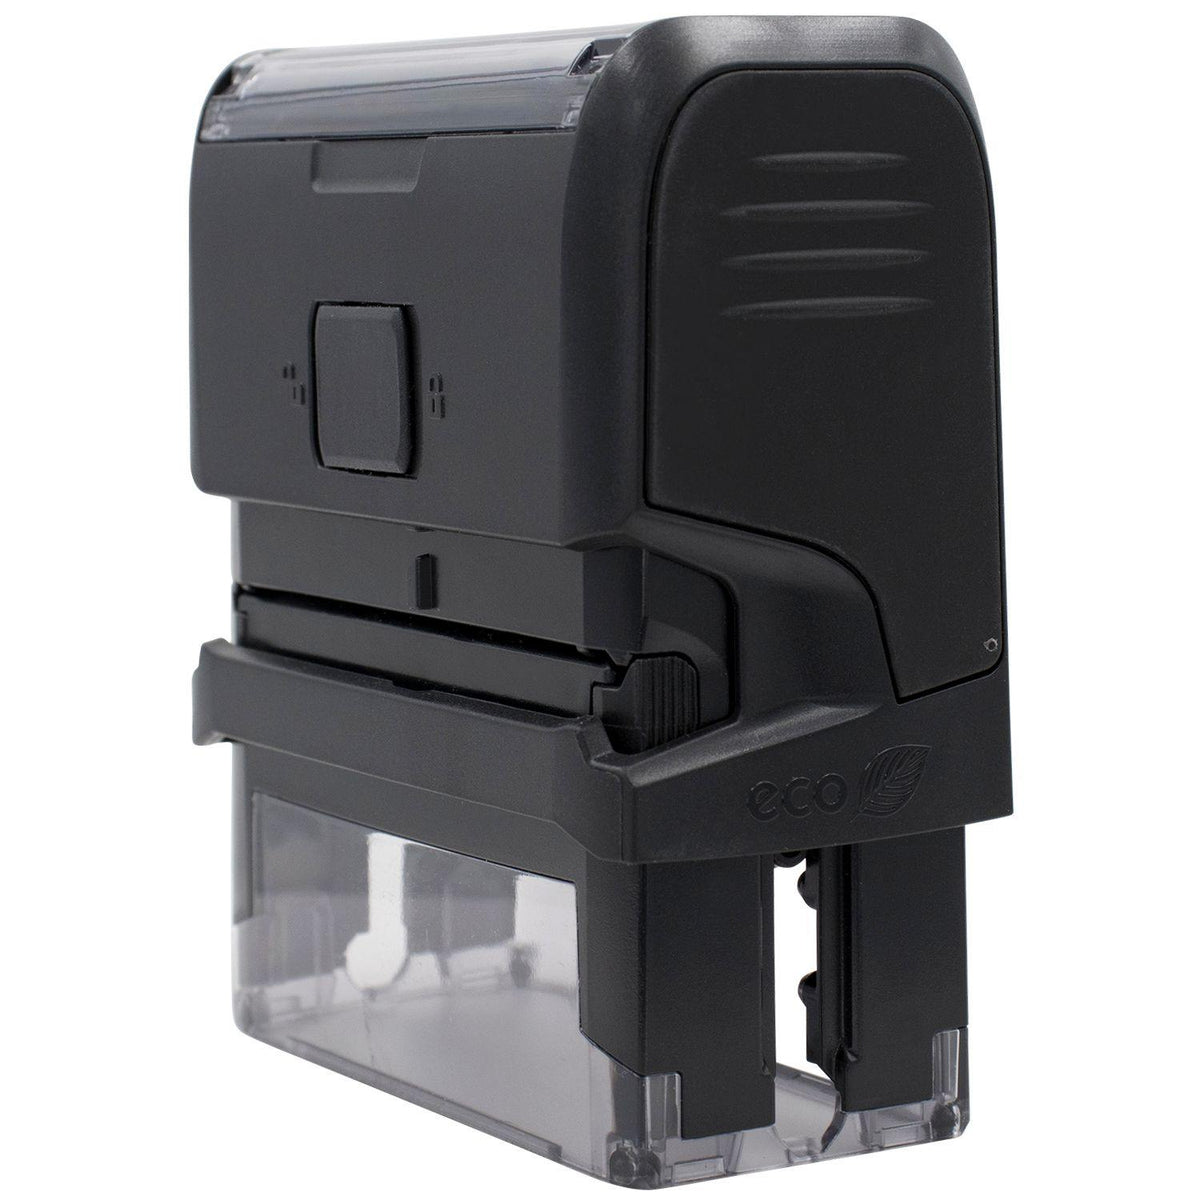 Self-Inking Covid-19 Stamp - Engineer Seal Stamps - Brand_Trodat, Impression Size_Small, Stamp Type_Self-Inking Stamp, Type of Use_Medical Office